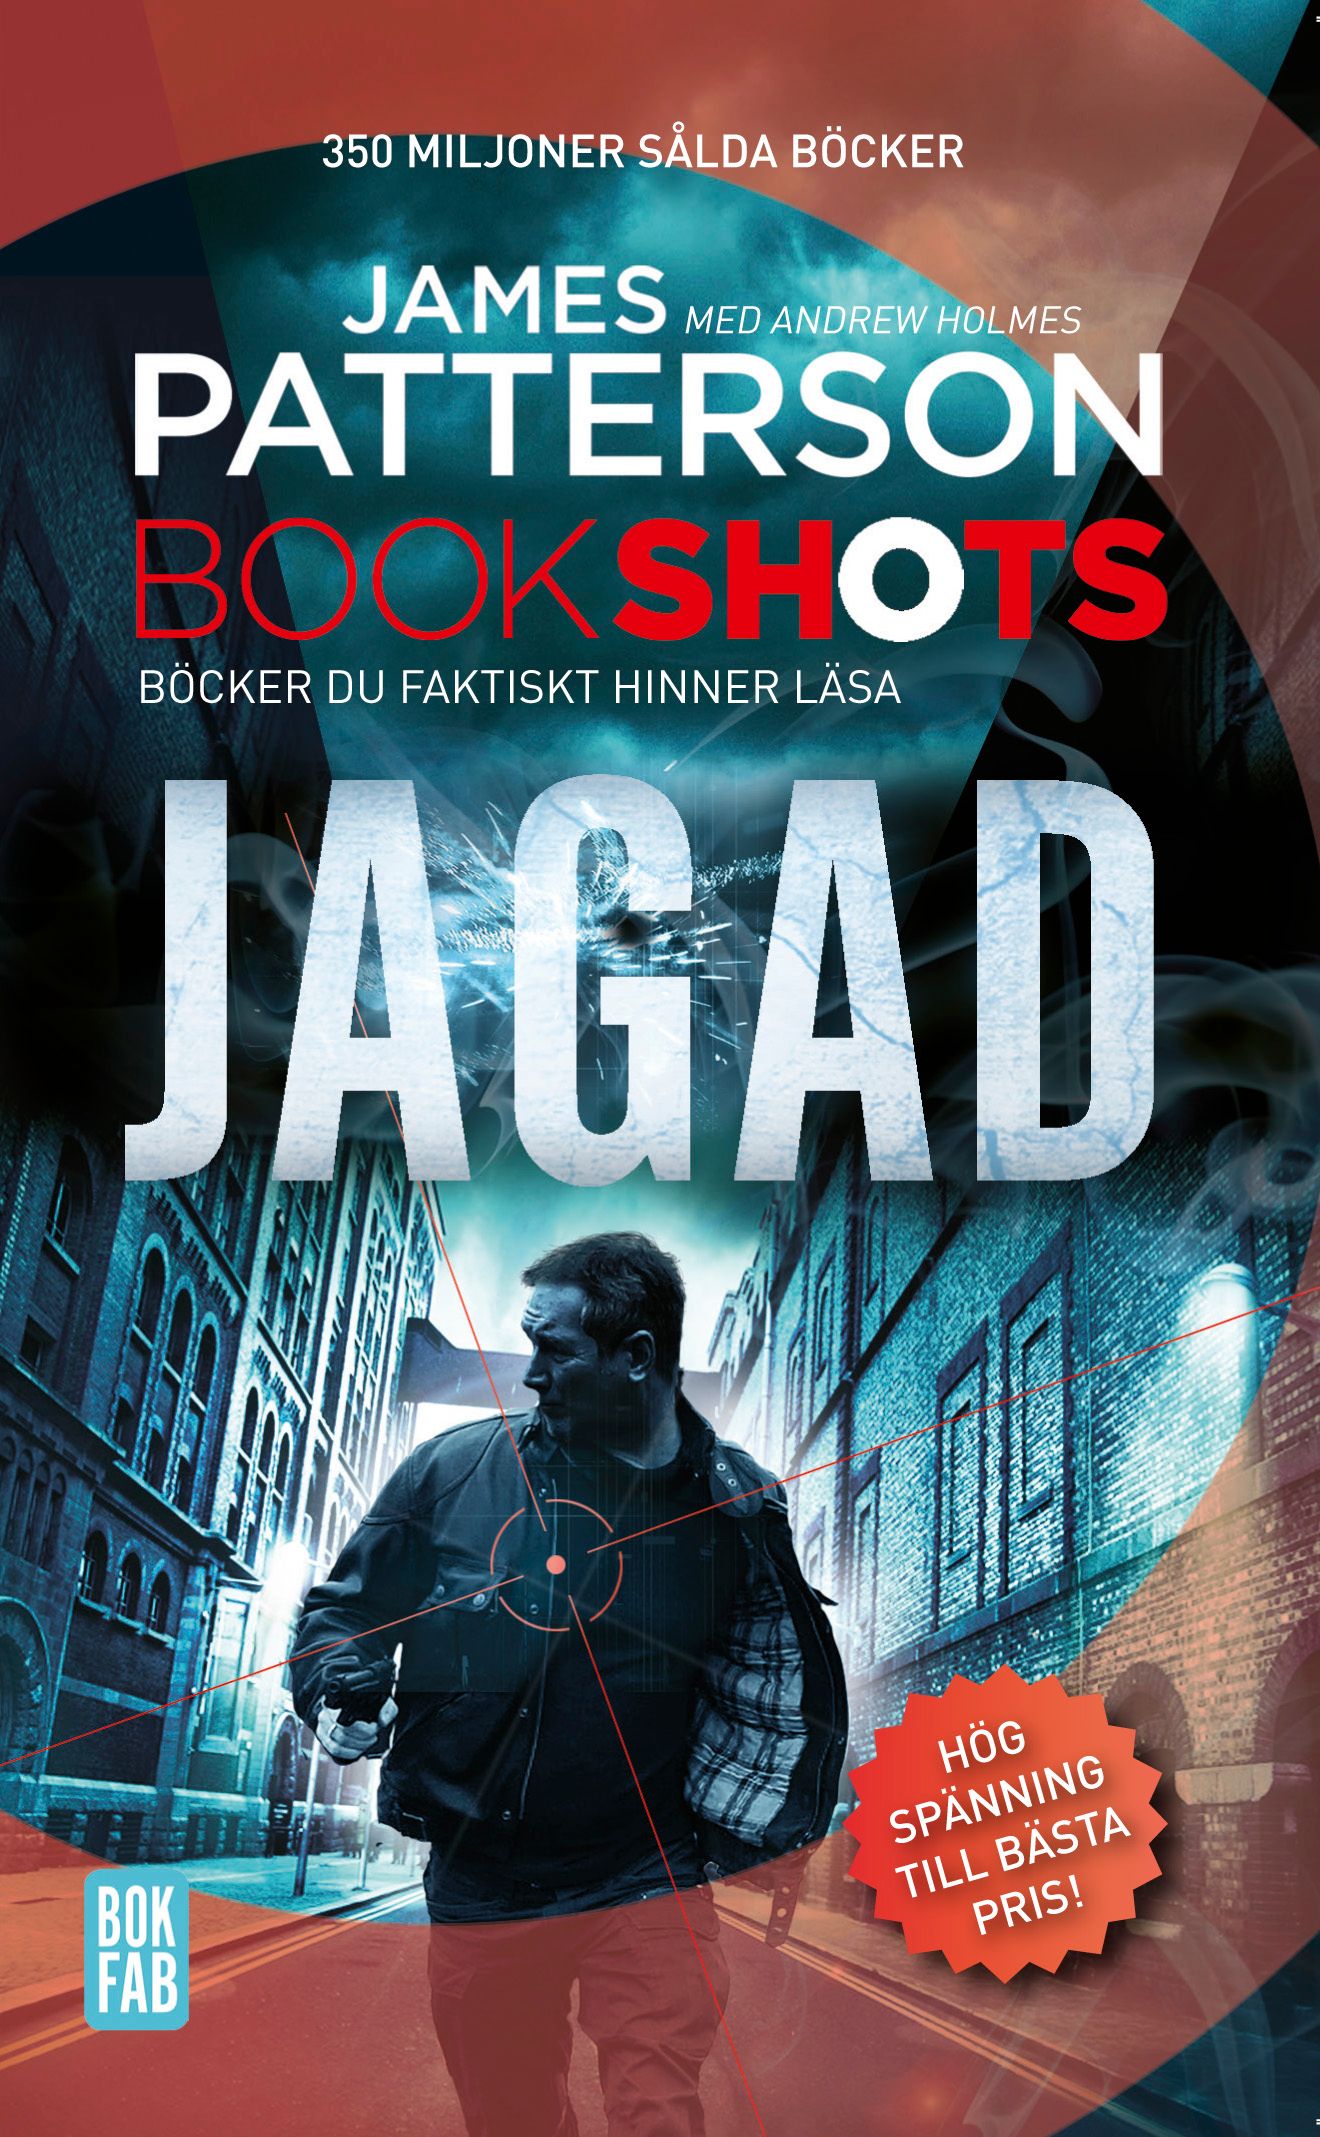 Bookshots: Jagad, eBook by Andrew Holmes, James Patterson